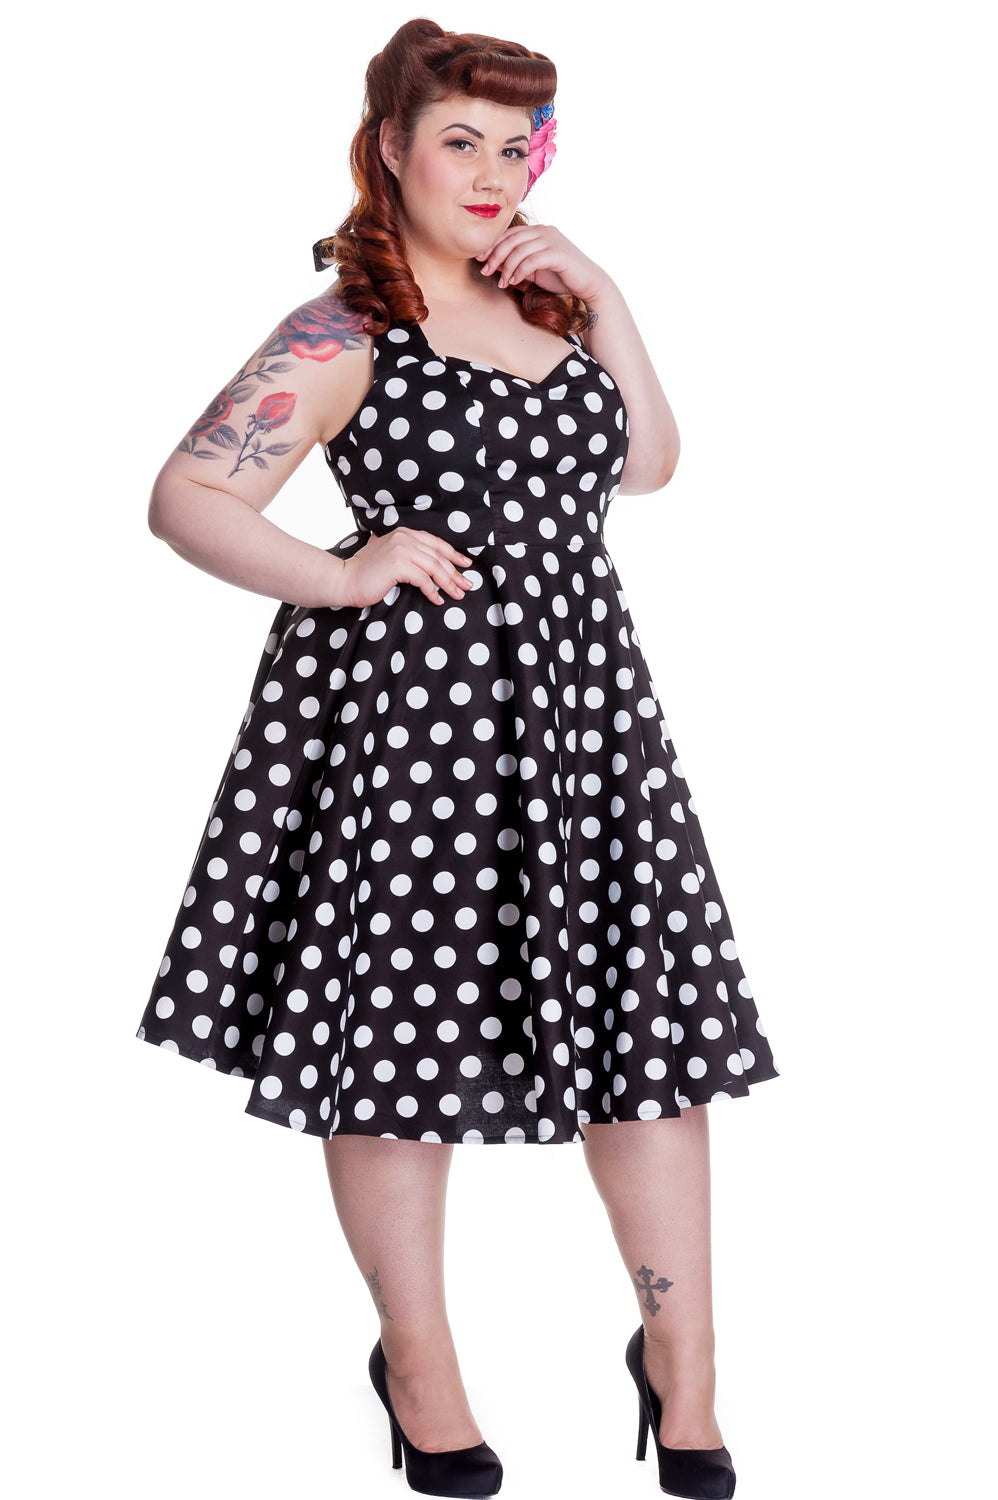 Pinup style model wearing a halter neck polka dress and black stilettos standing with one hand to her face and the other on her hip